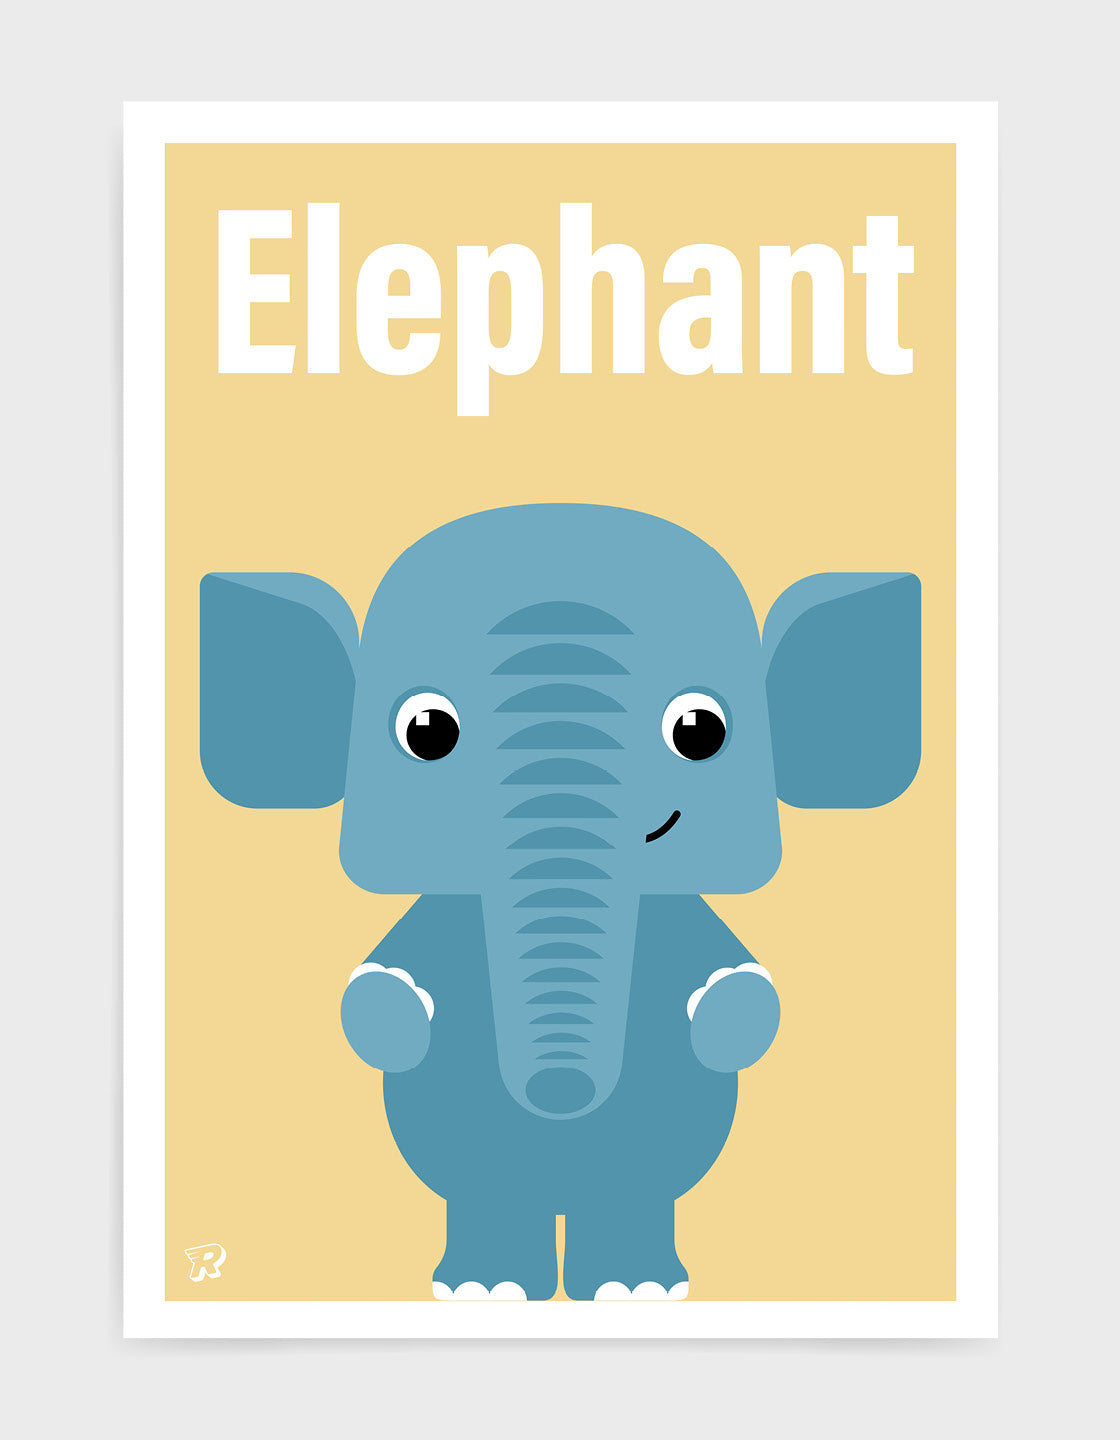 childs art print depicting a cute elephant illustration in blue against a yellow background. The word elephant is written above